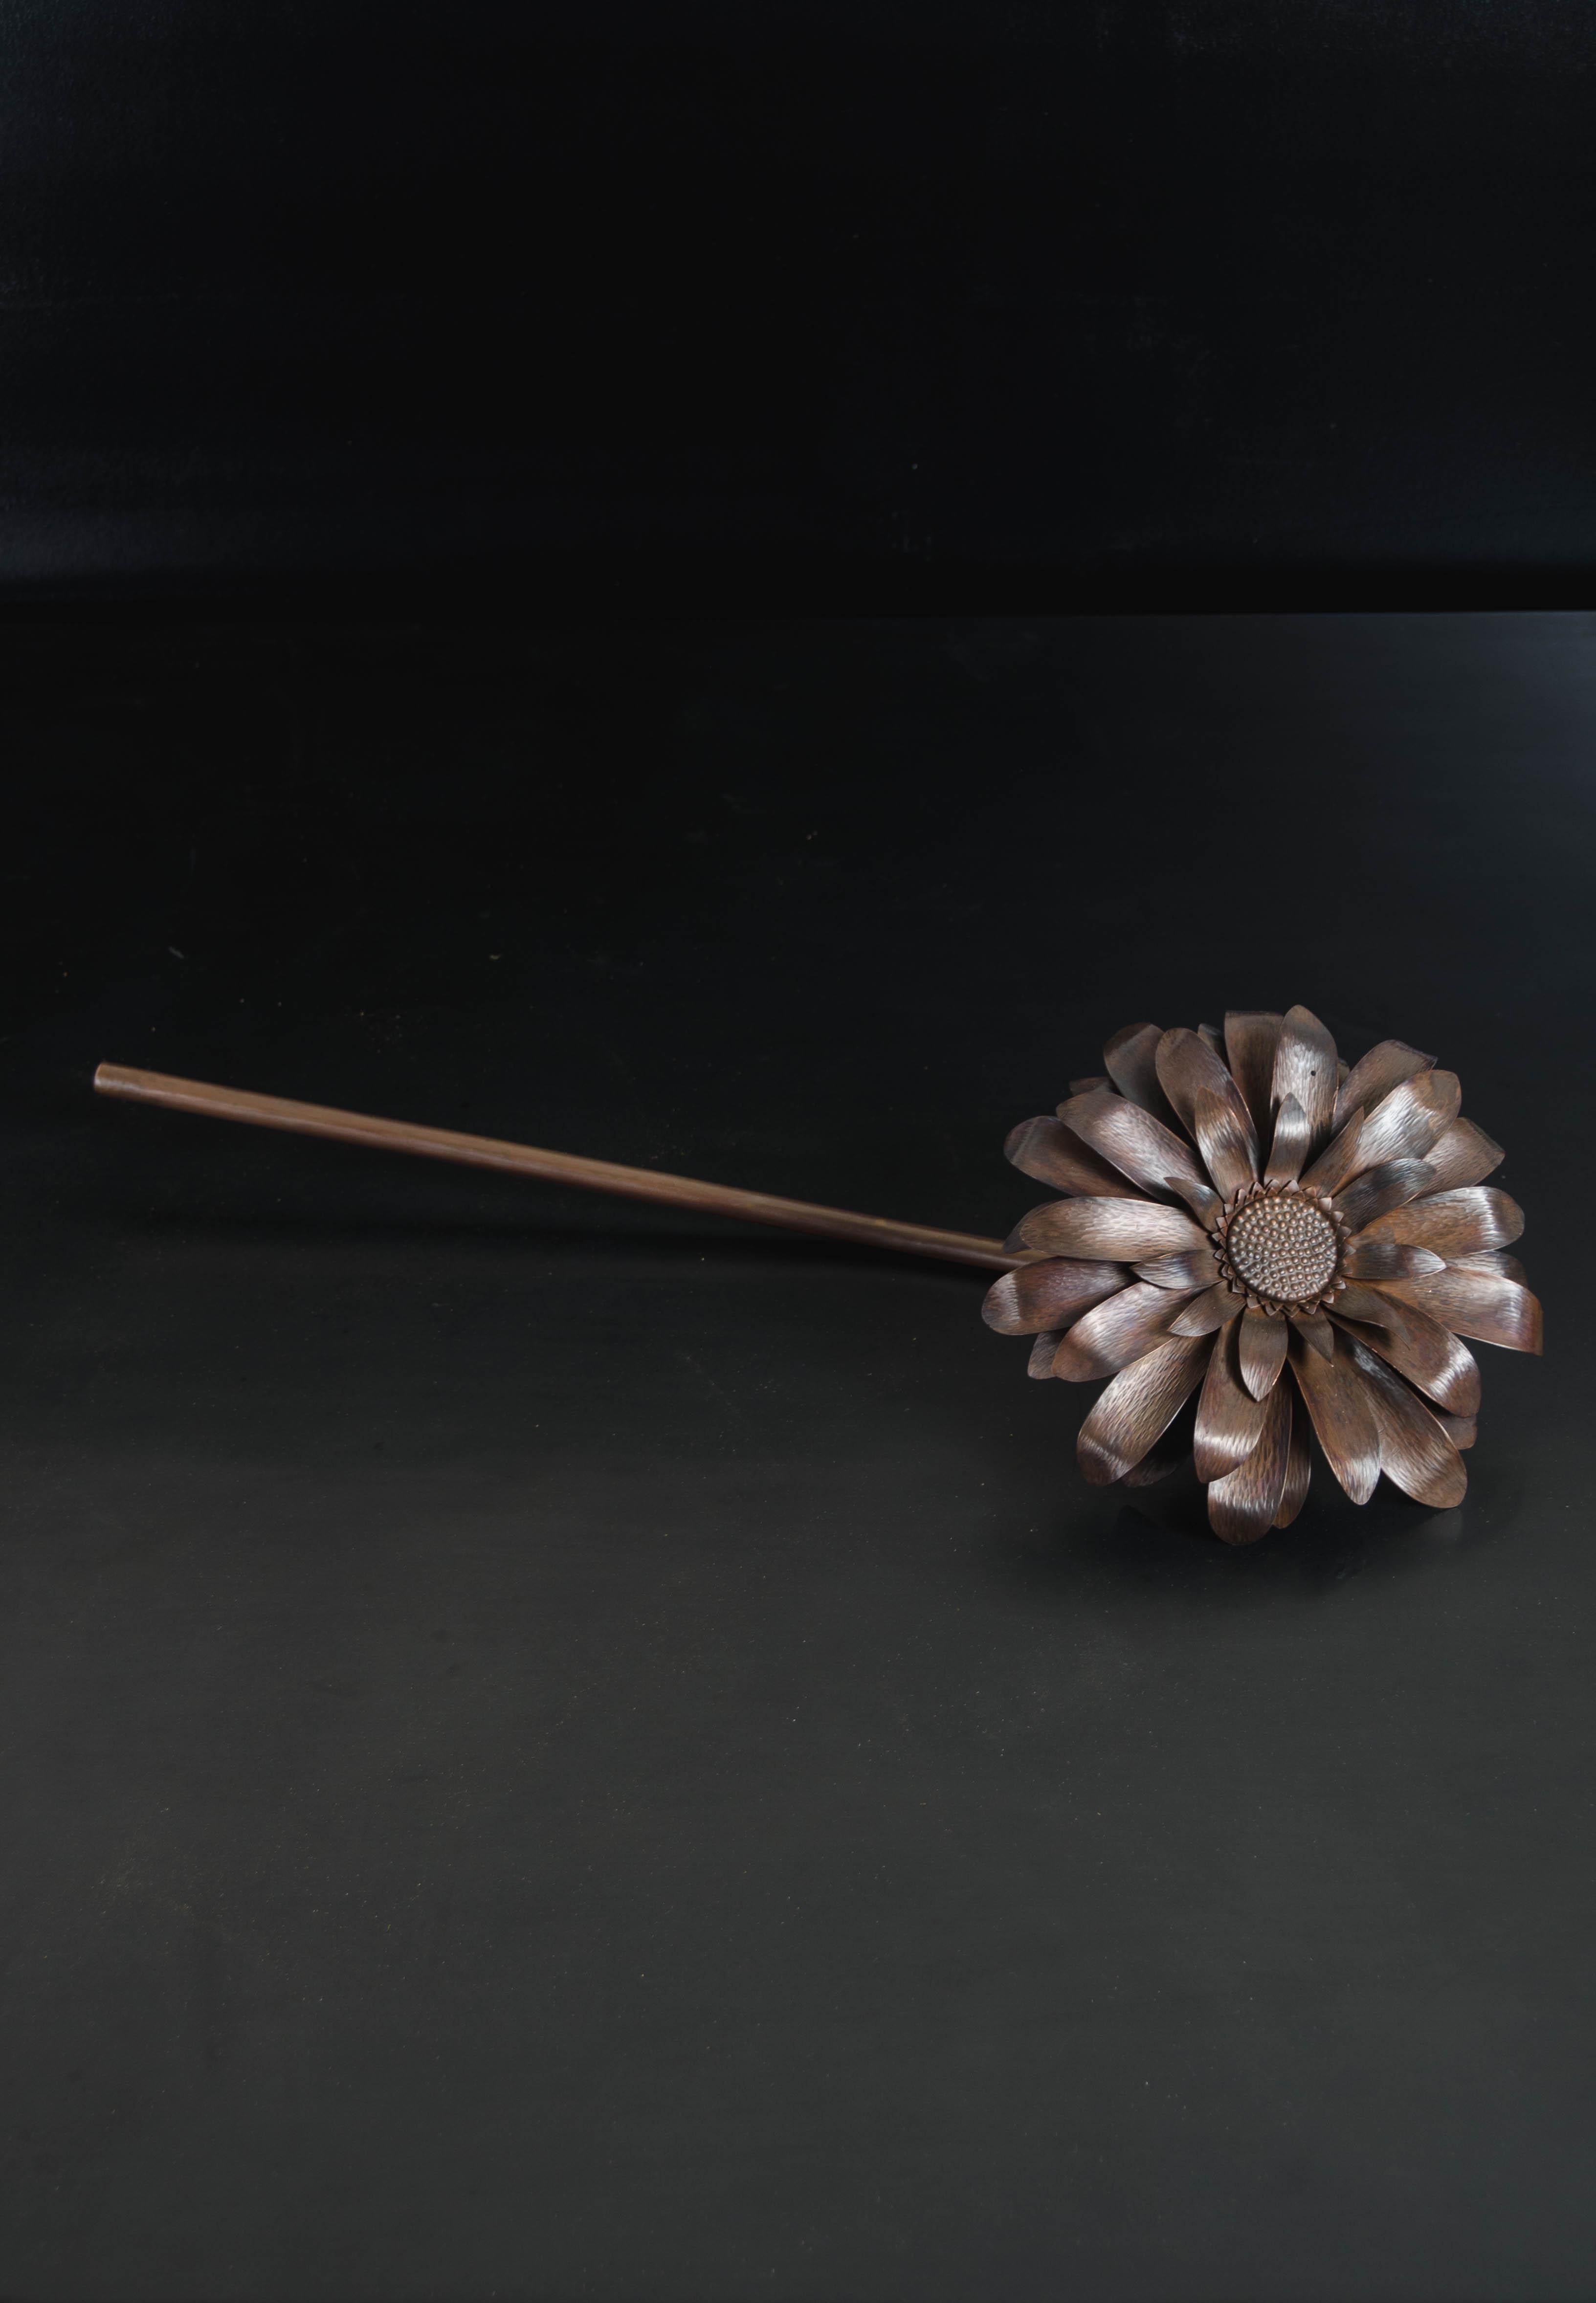 Gerber daisy flower
Antique copper
Hand repoussé
Limited edition 
Each piece is individually crafted and is unique.

Repoussé is the traditional art of hand-hammering decorative relief onto sheet metal. The technique involves using a hammer